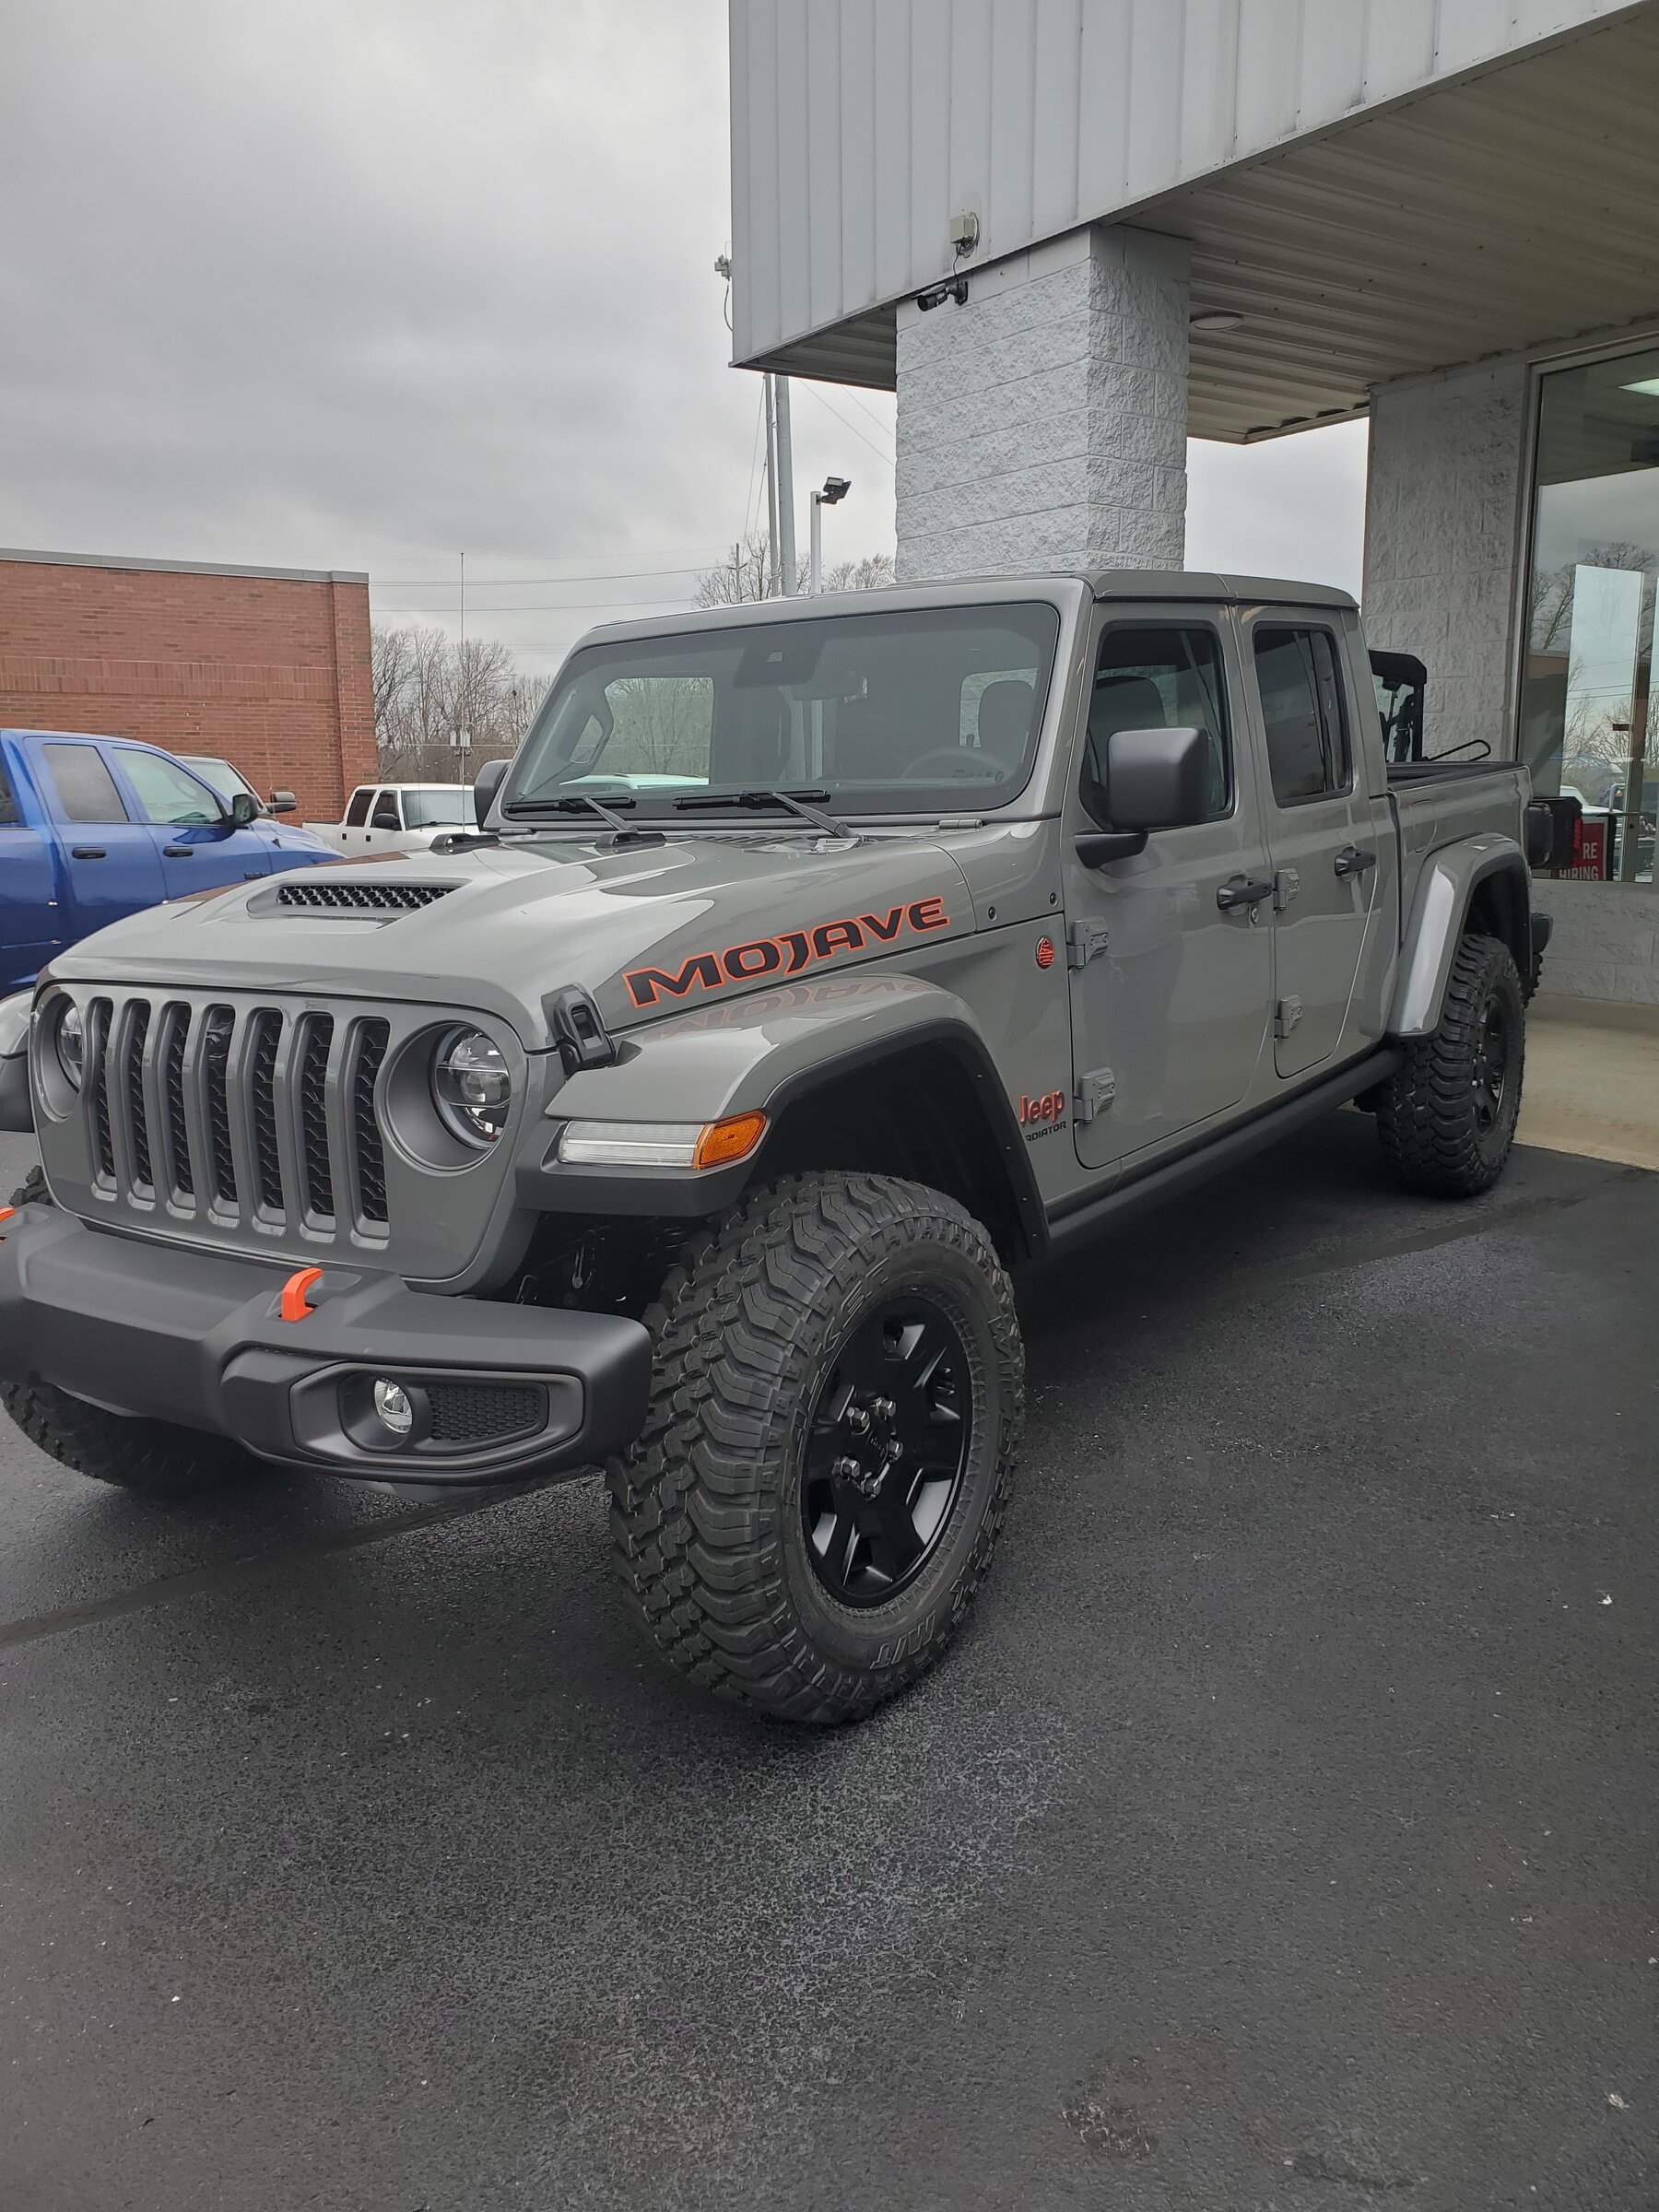 Jeep Gladiator Took Delivery of Your JT? Sign in Here! 20211227_103544